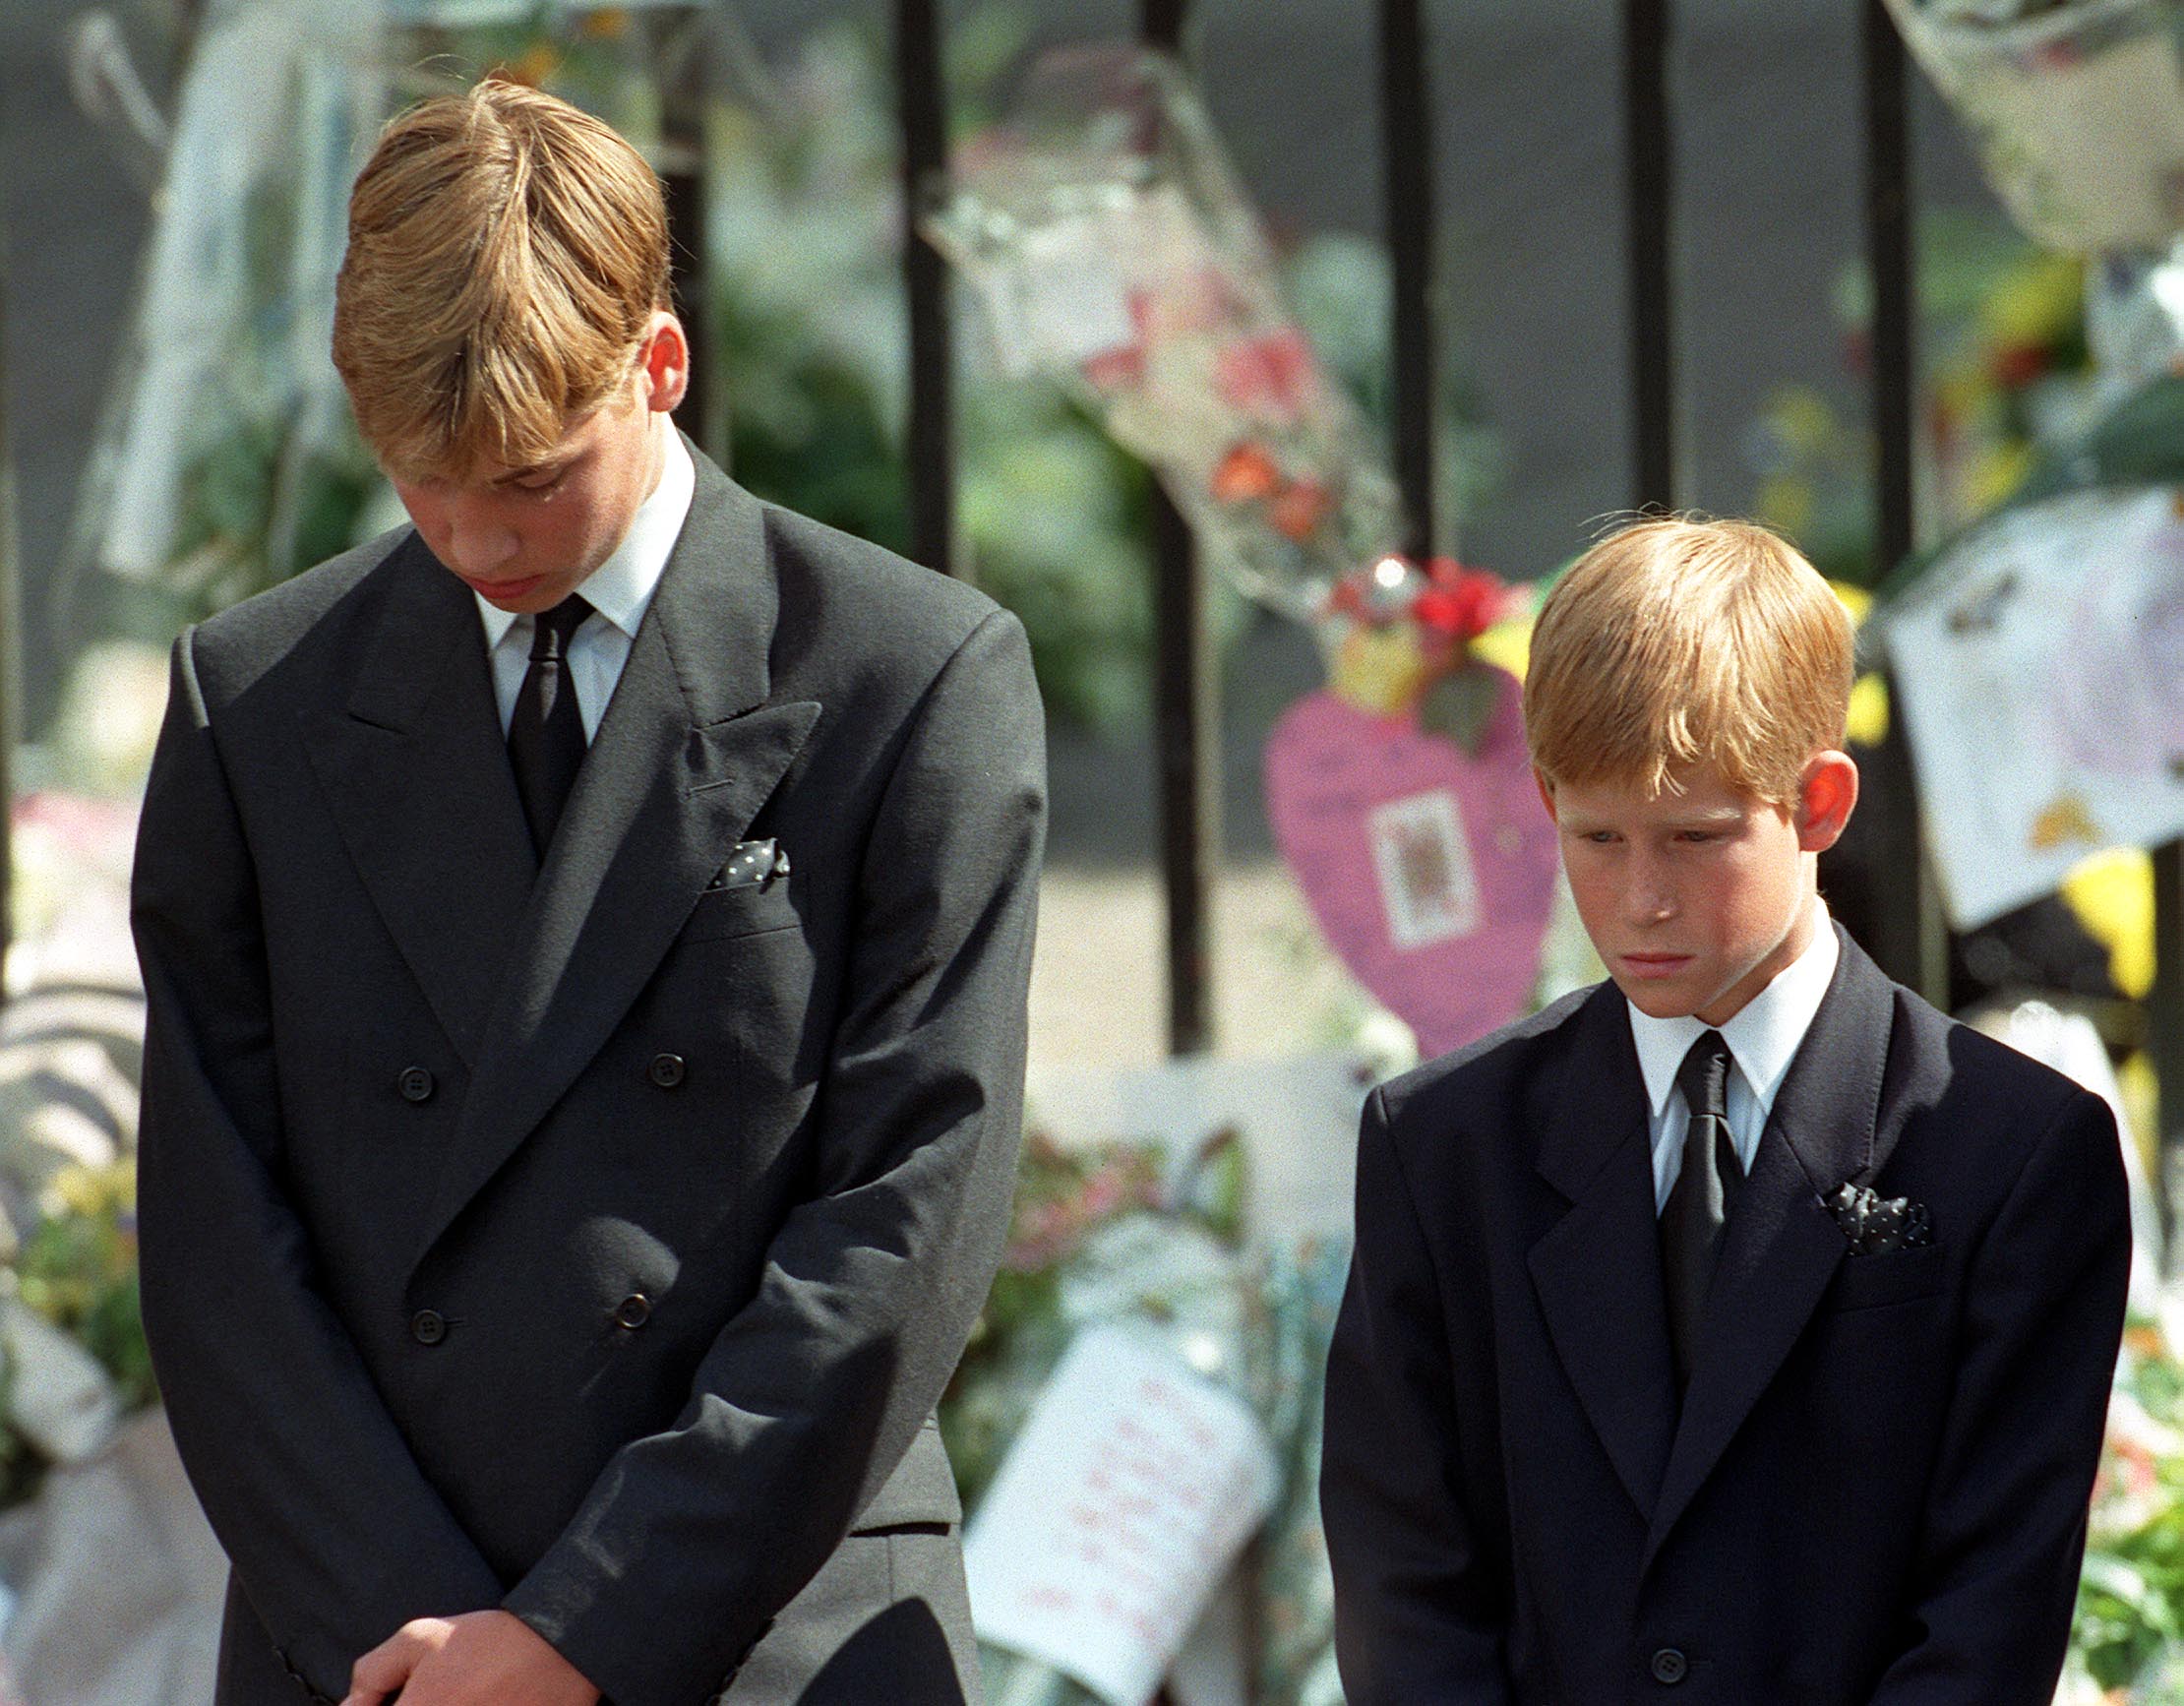 Prince William (left) and Prince Harry, the sons of Diana, Princess of Wales, bow their heads as their mother's coffin is taken out of Westminster Abbey following her funeral service. 